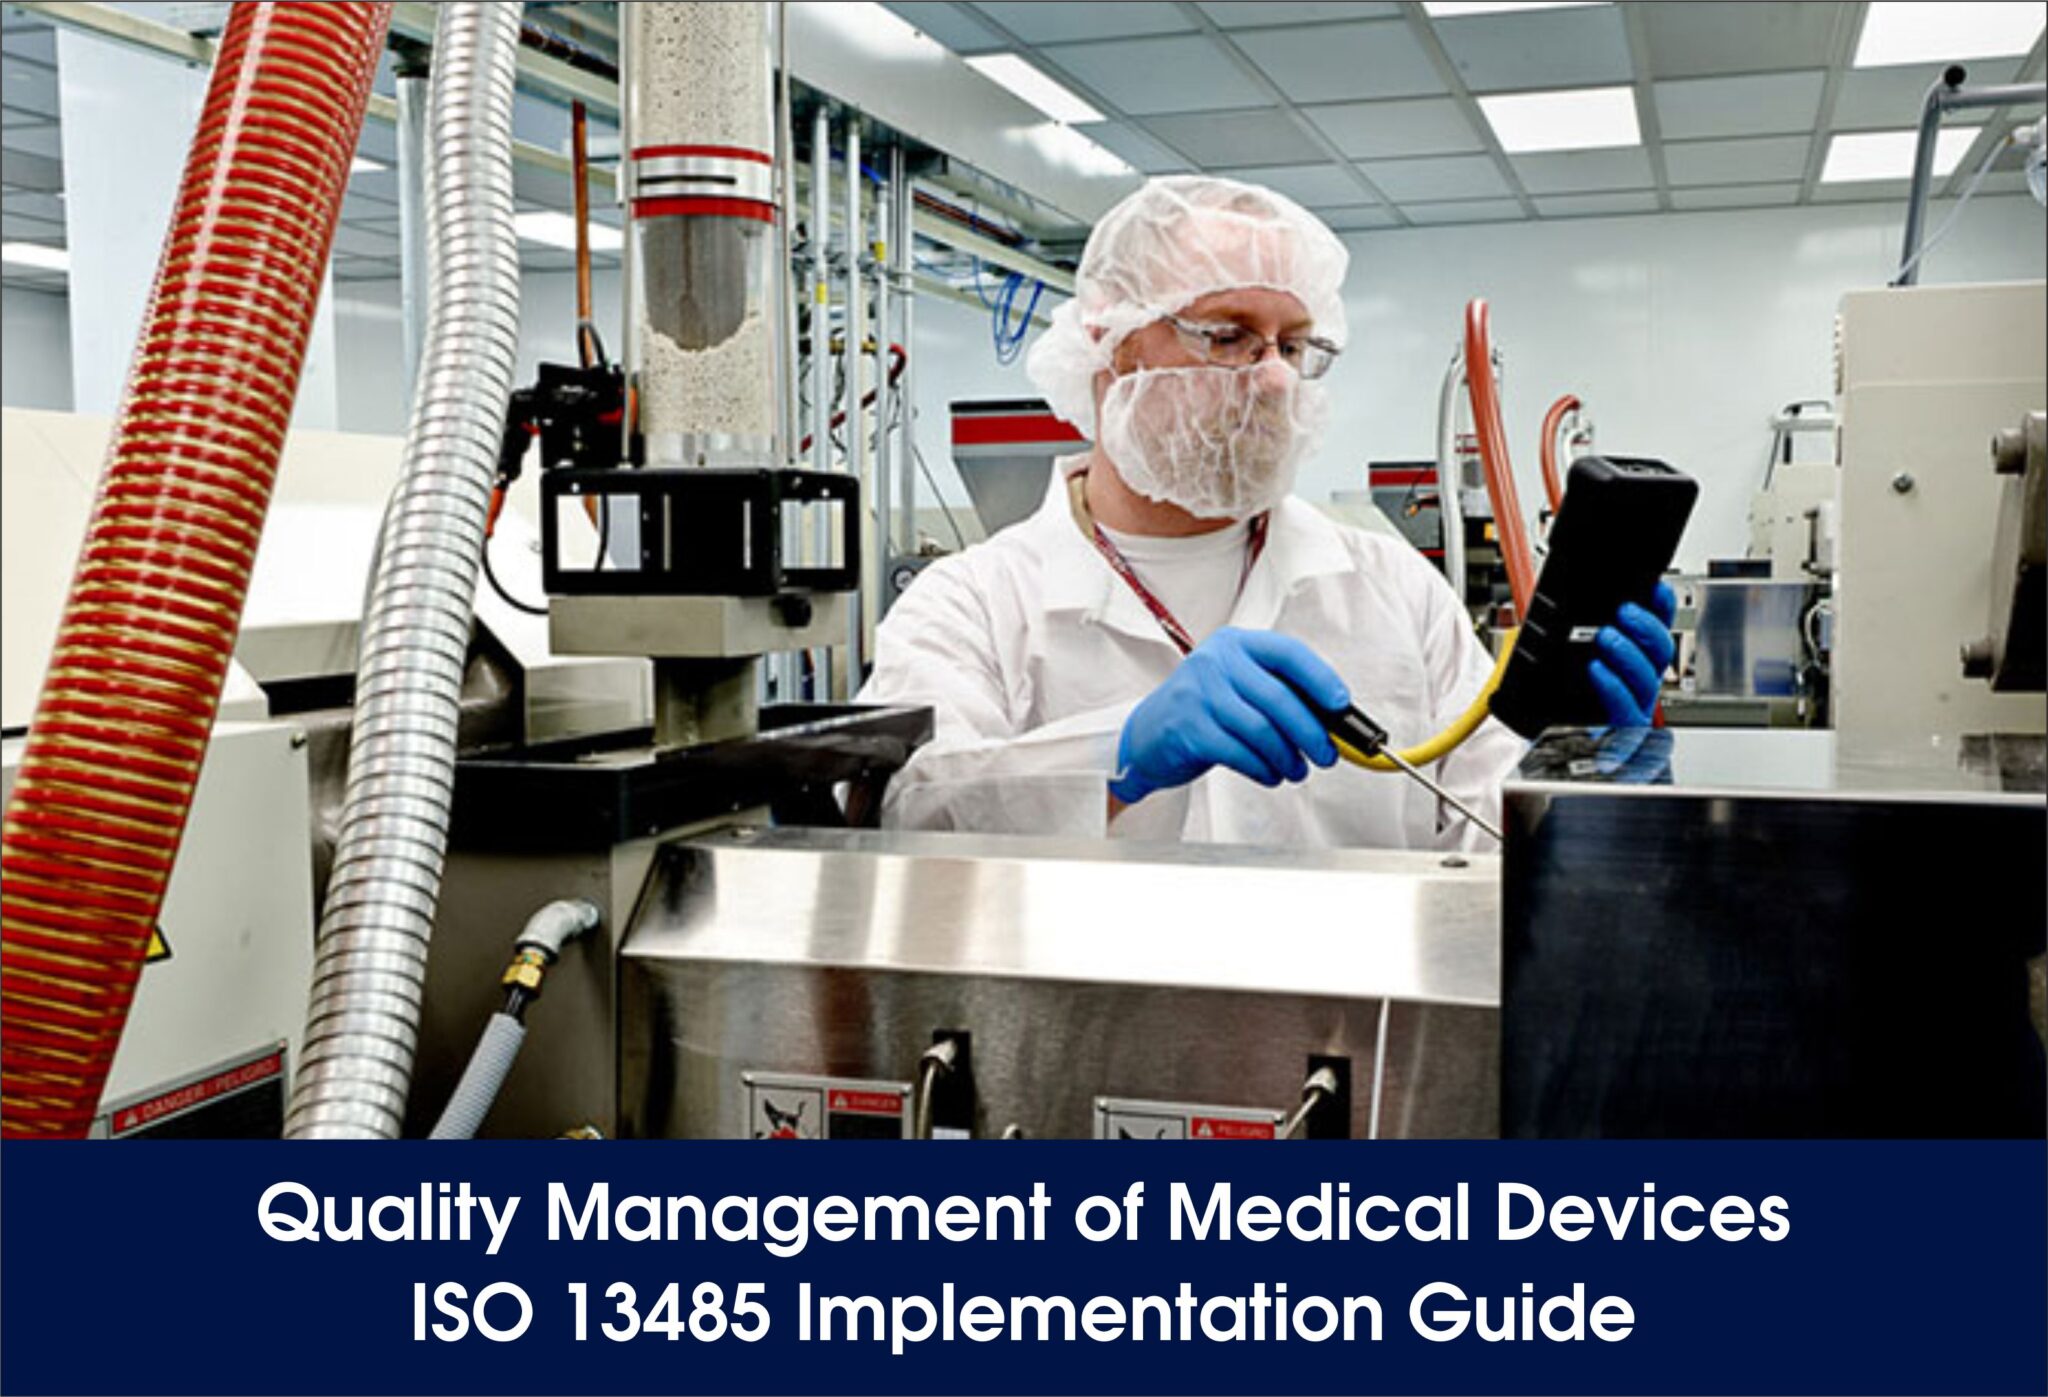 Quality Management of Medical Devices – ISO 13485 Implementation Guide